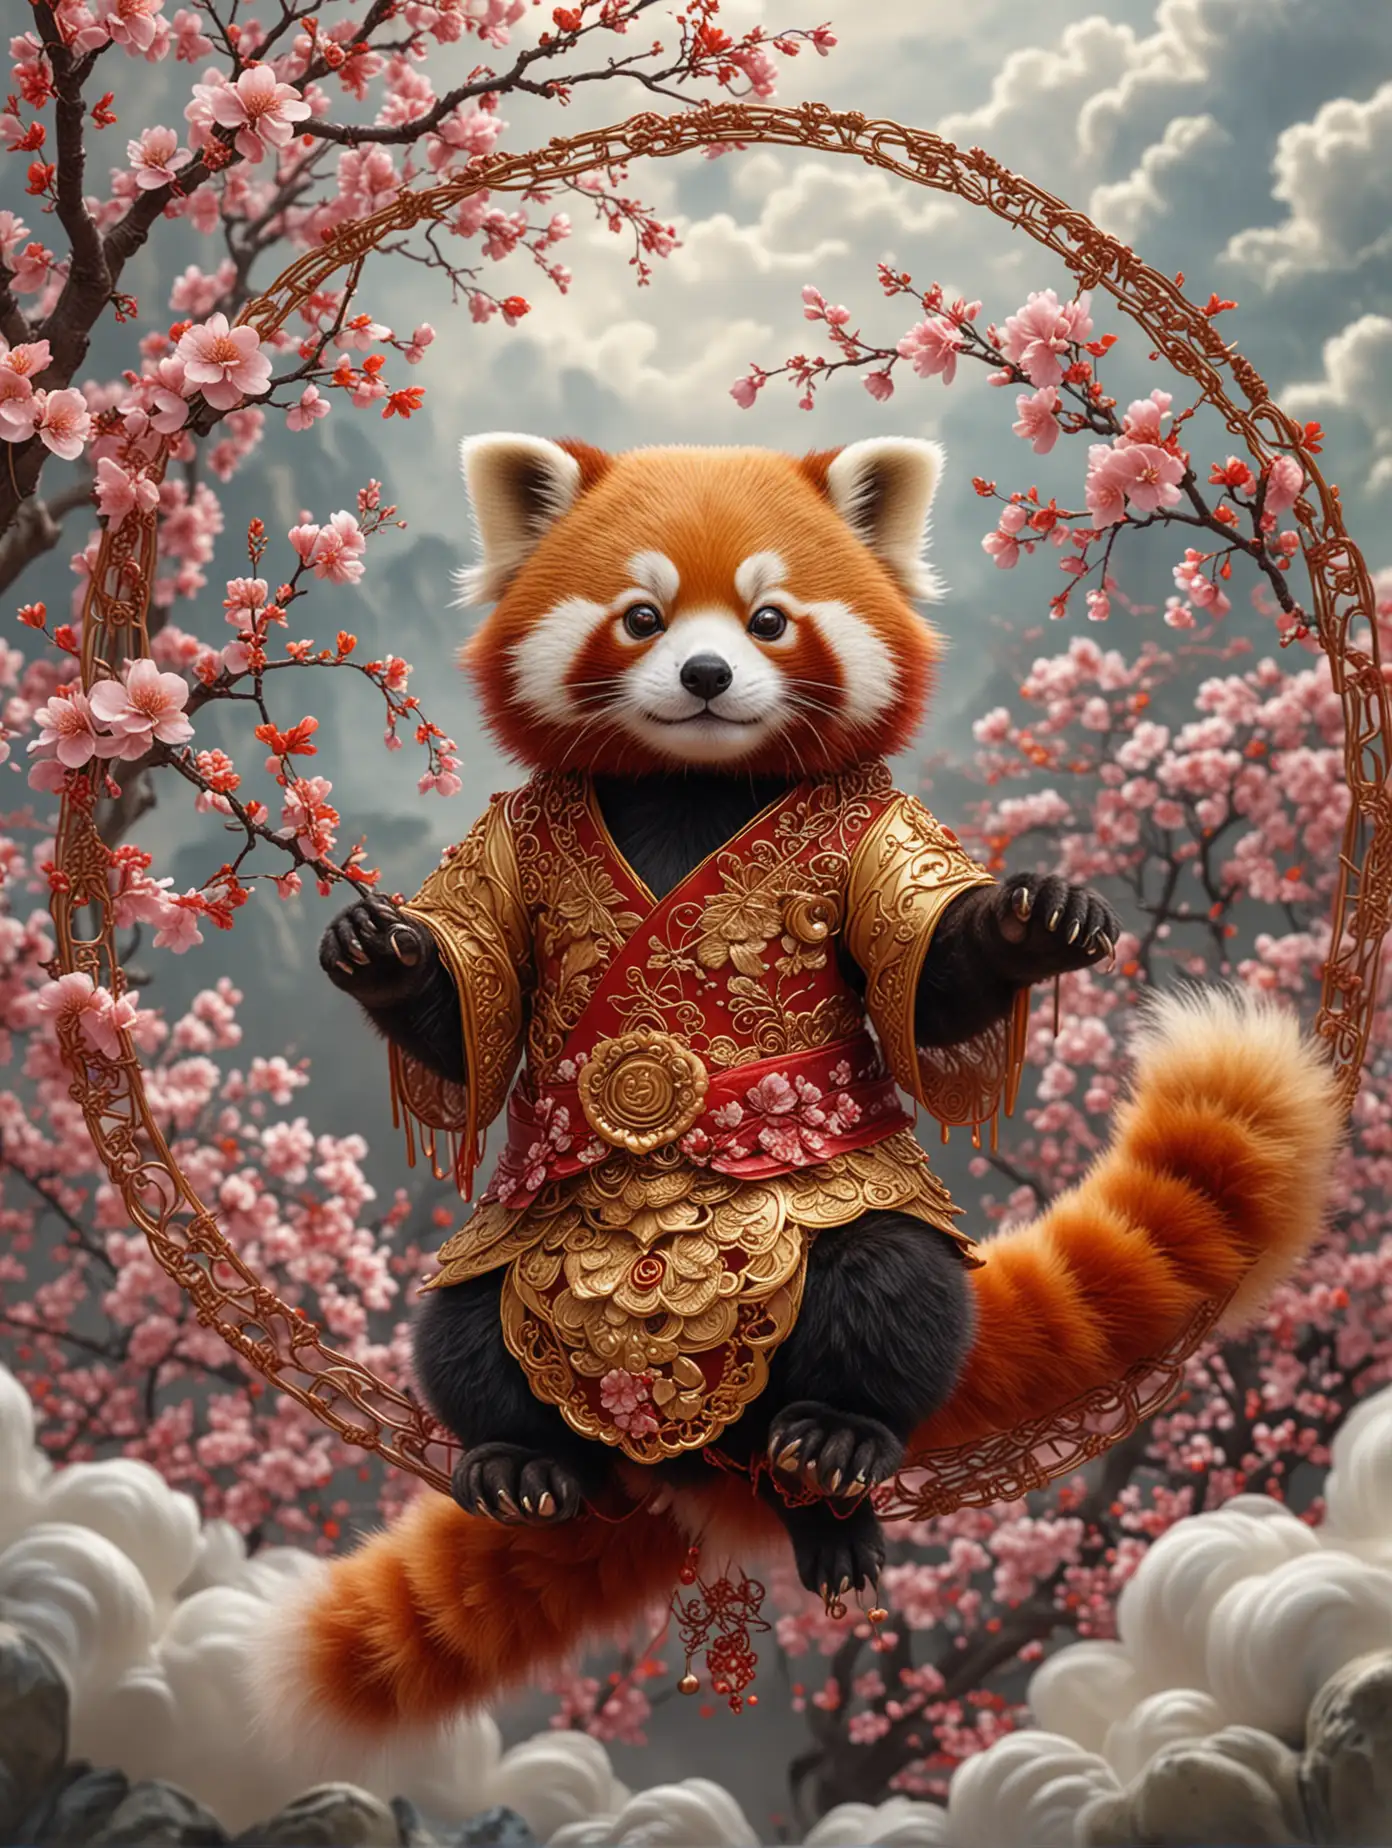 Majestic Red Panda Adorned in Golden Wire Lace with Cherry Blossoms and Cloud Dragon